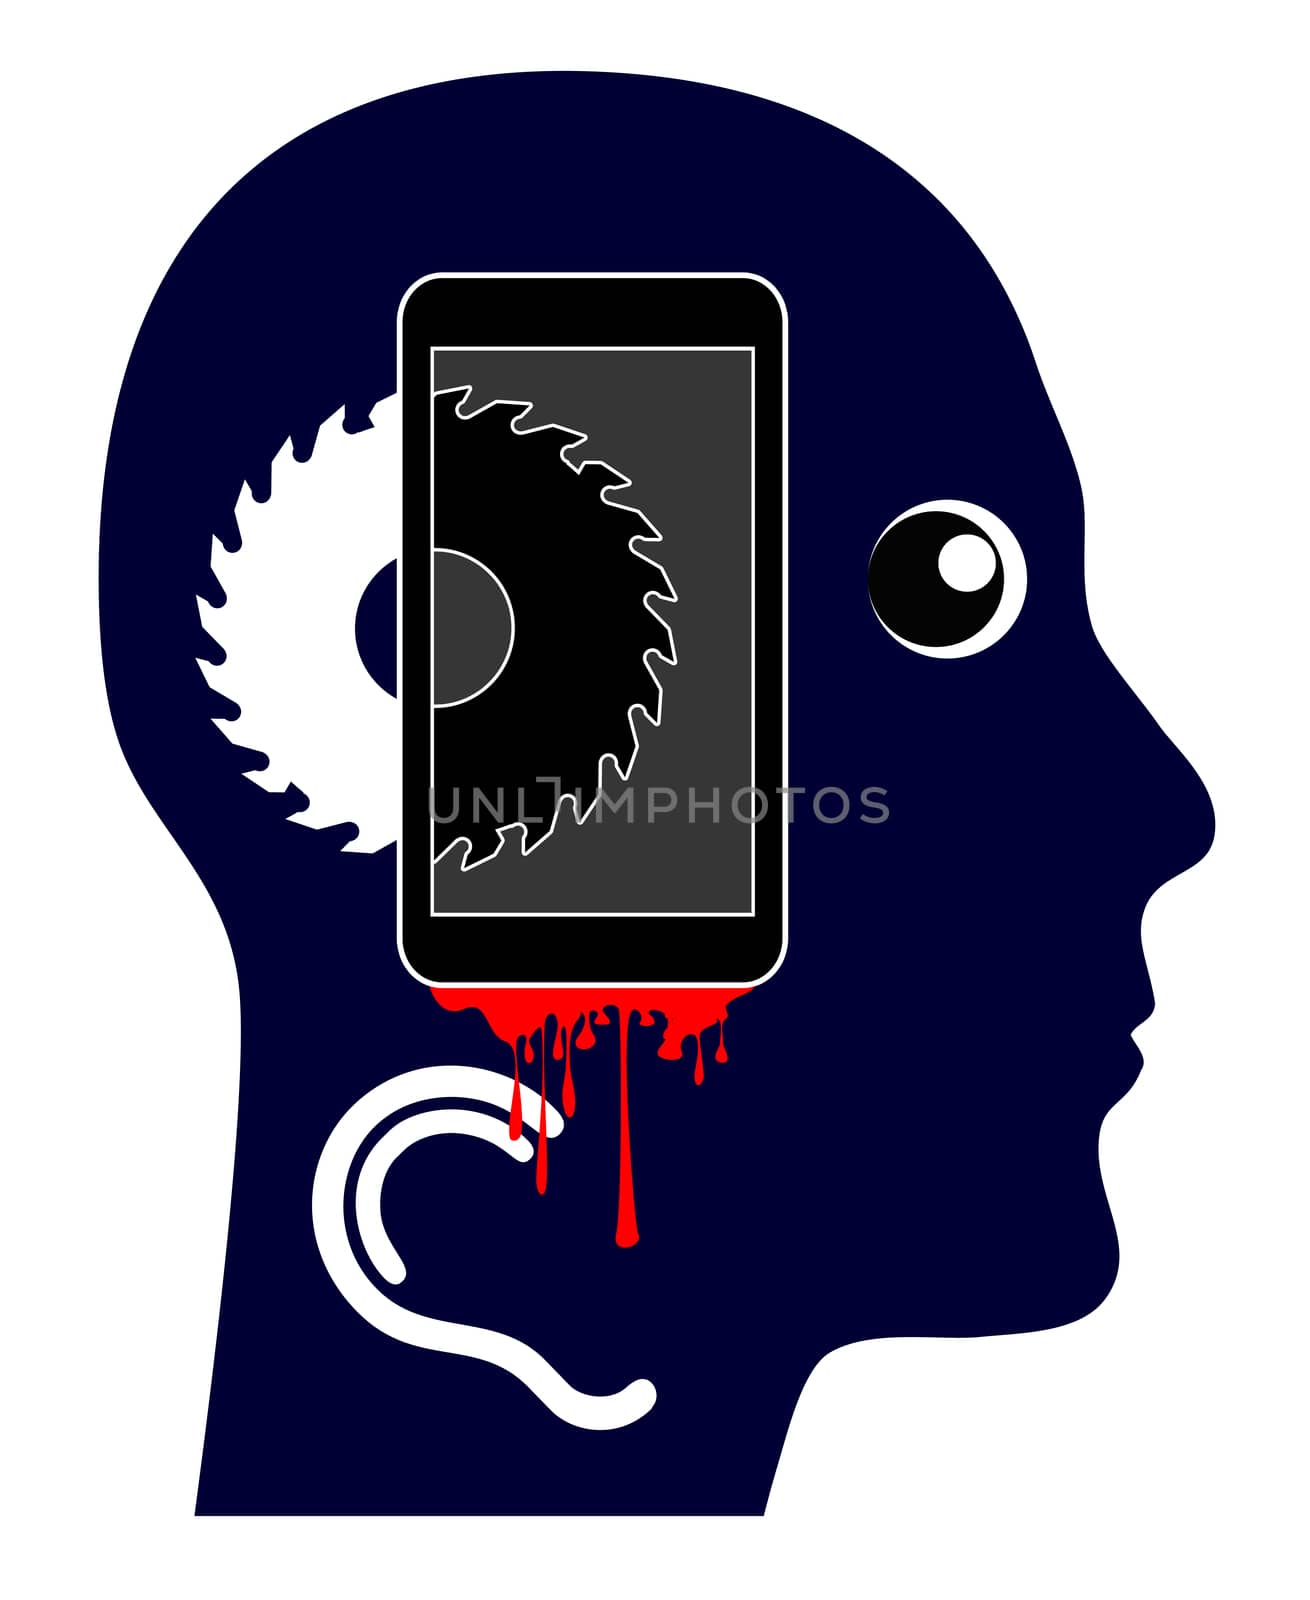 Smartphone is killing you by Bambara